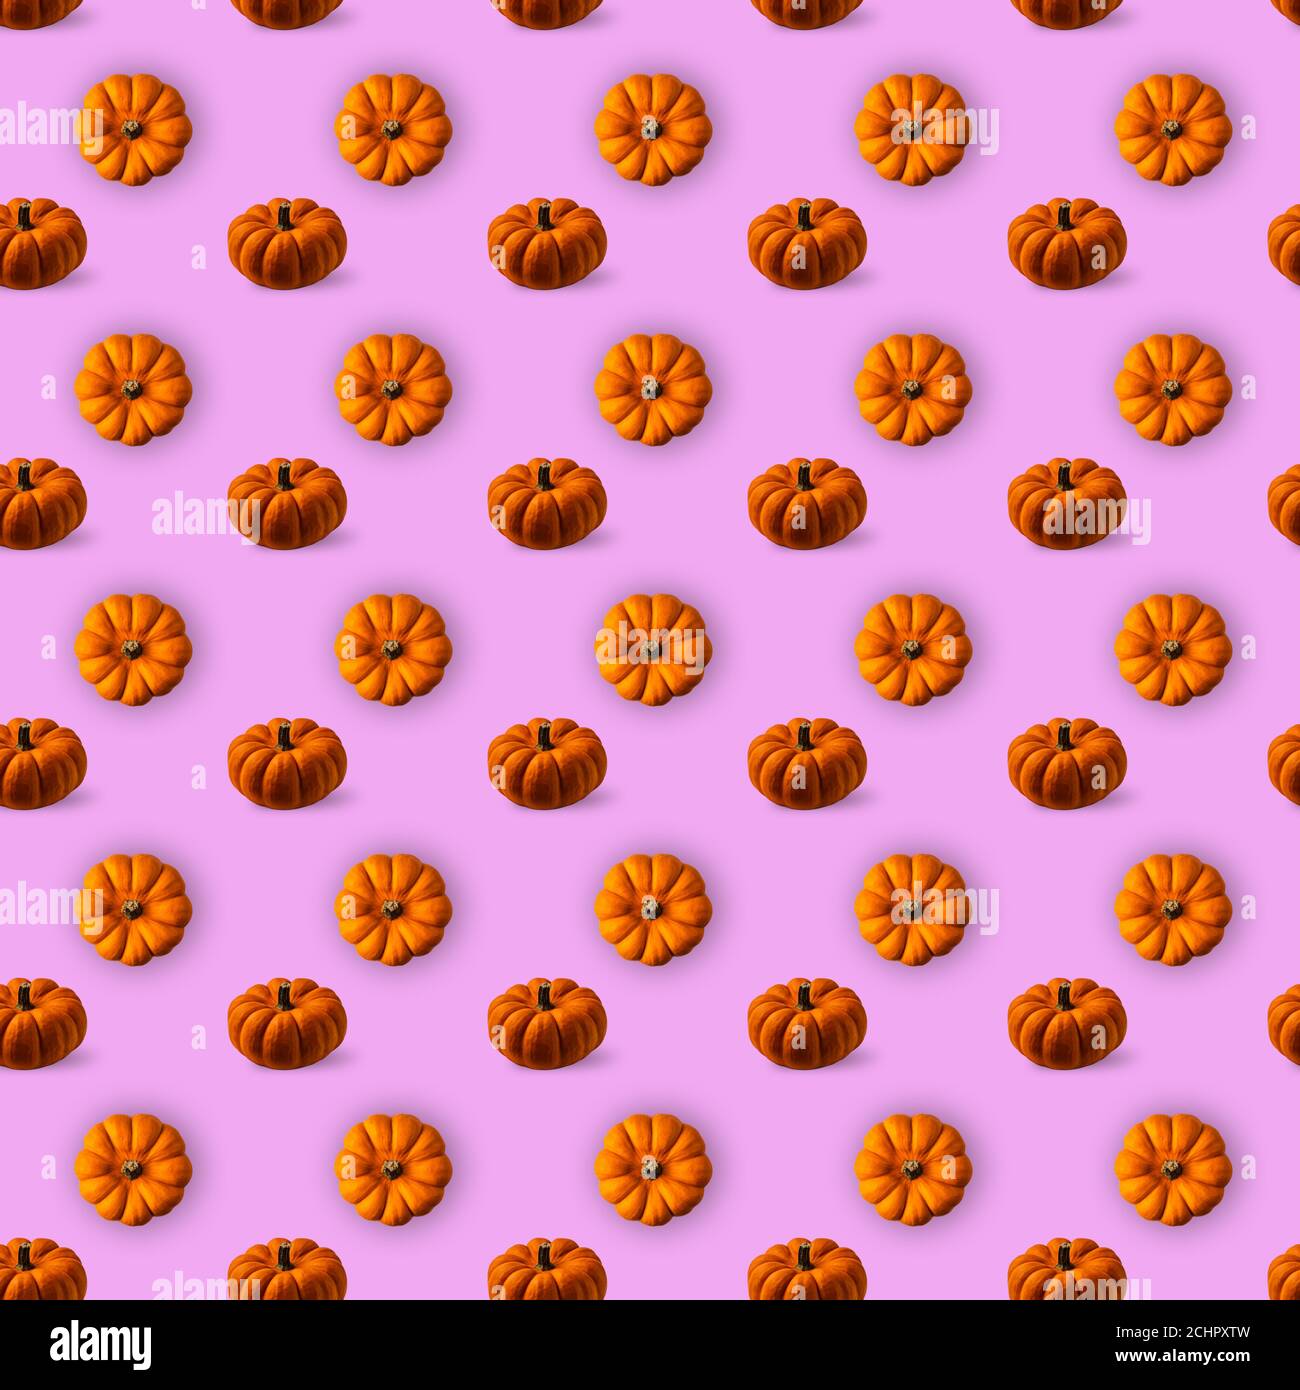 Seamless pattern with bright orange and brown round textured pumpkins on pink background. Directly above and high angle view on pumpkins. Stock Photo